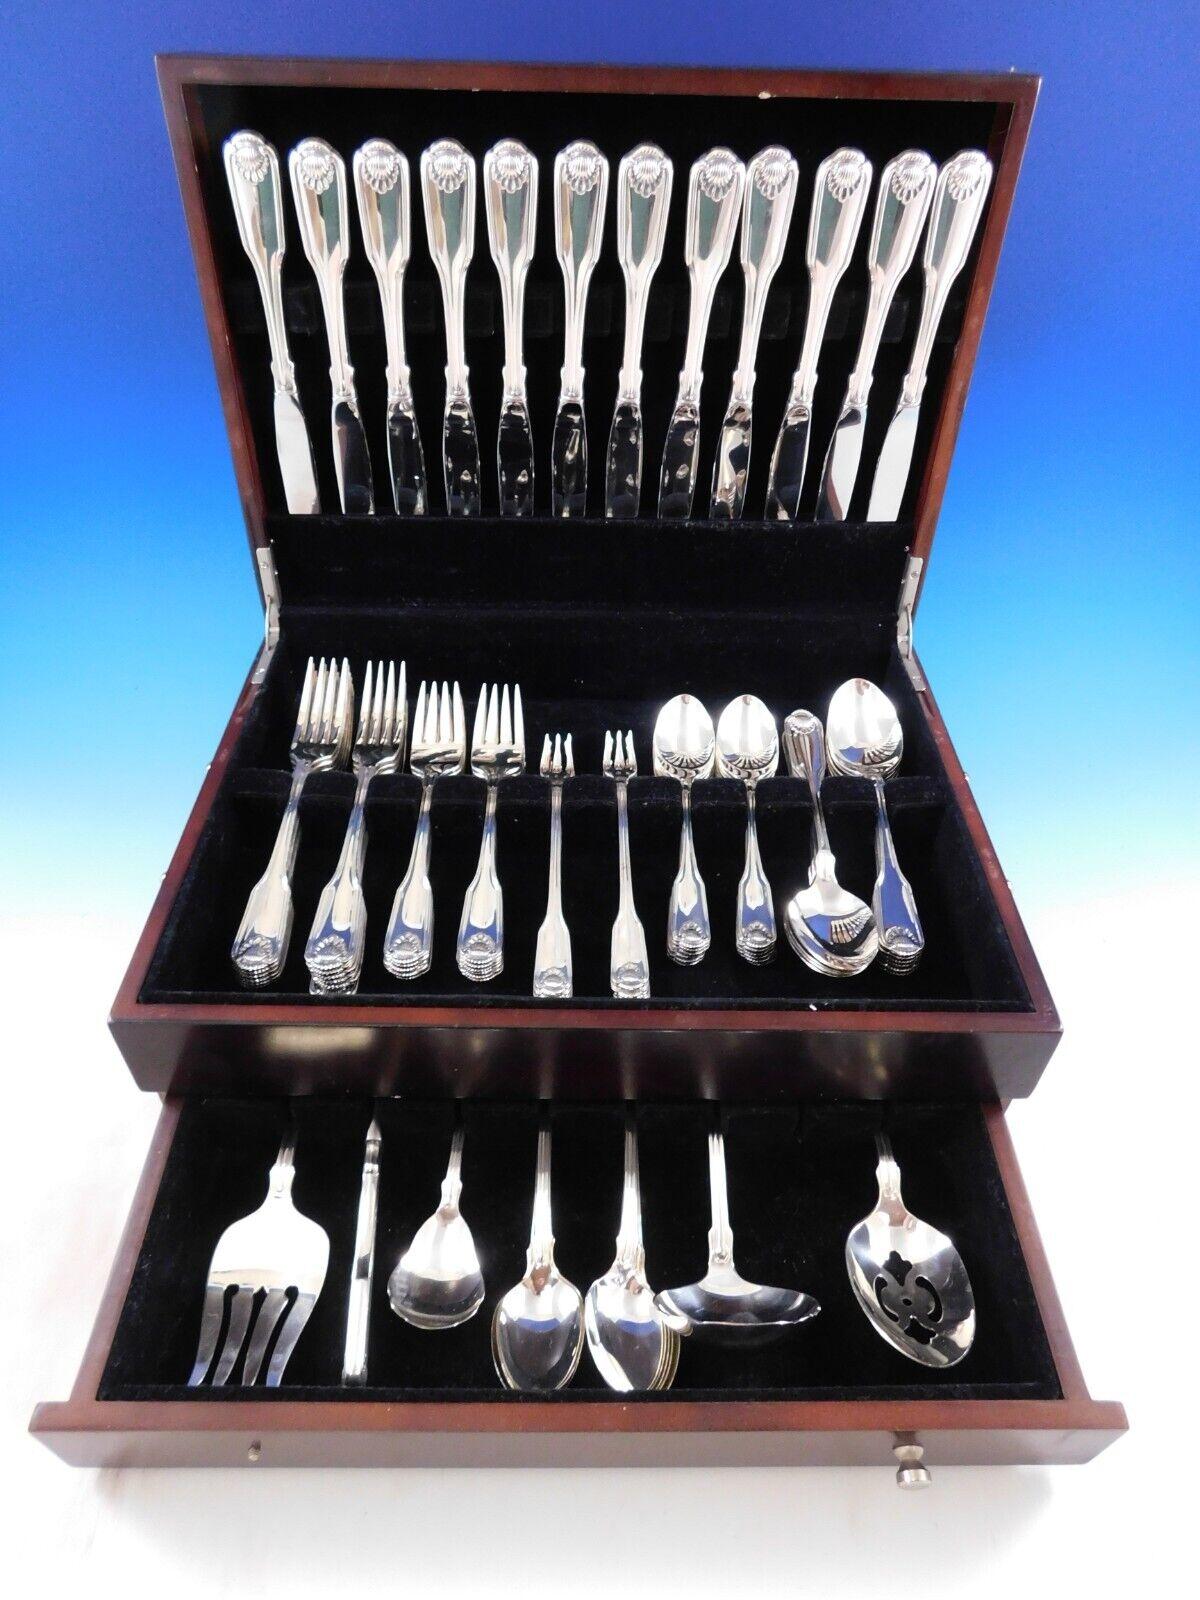 Silver Shell by Community Oneida Silverplate Flatware set - 89 Pieces. This set includes:
12 Dinner Knives, 9 1/2